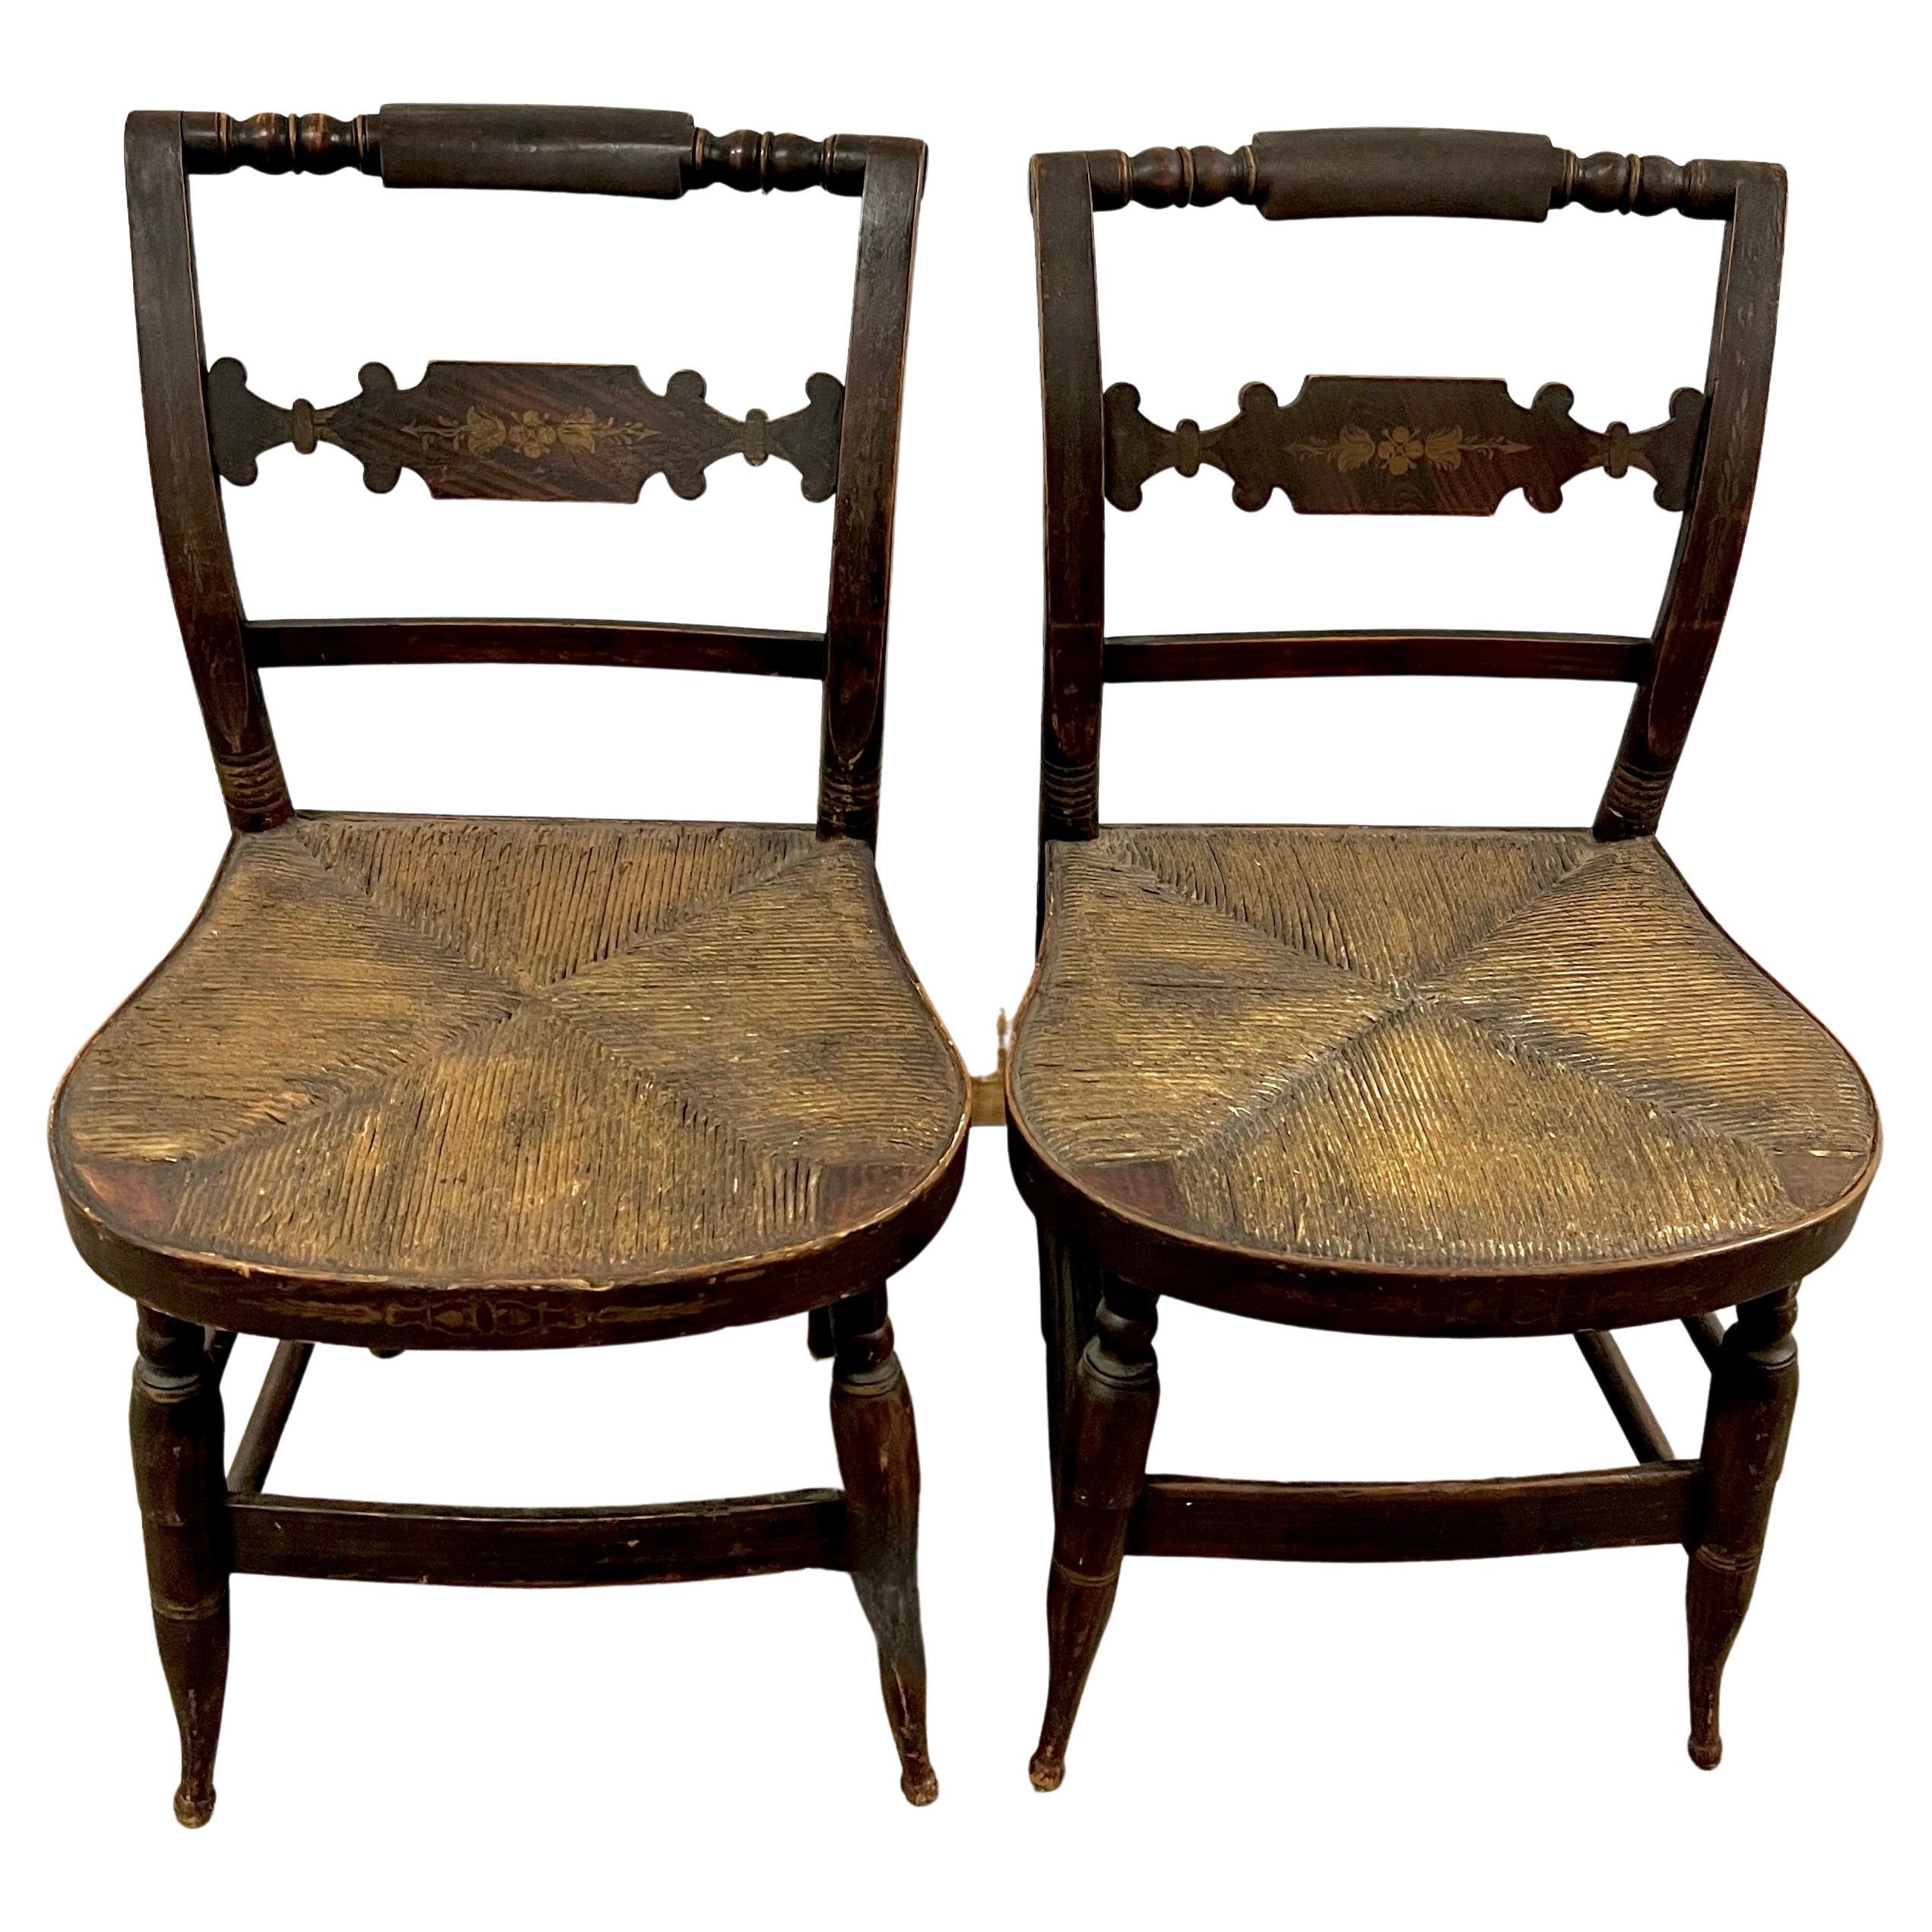 Pair of New England Hitchcock Style Chairs with Woven Rush Seats For Sale